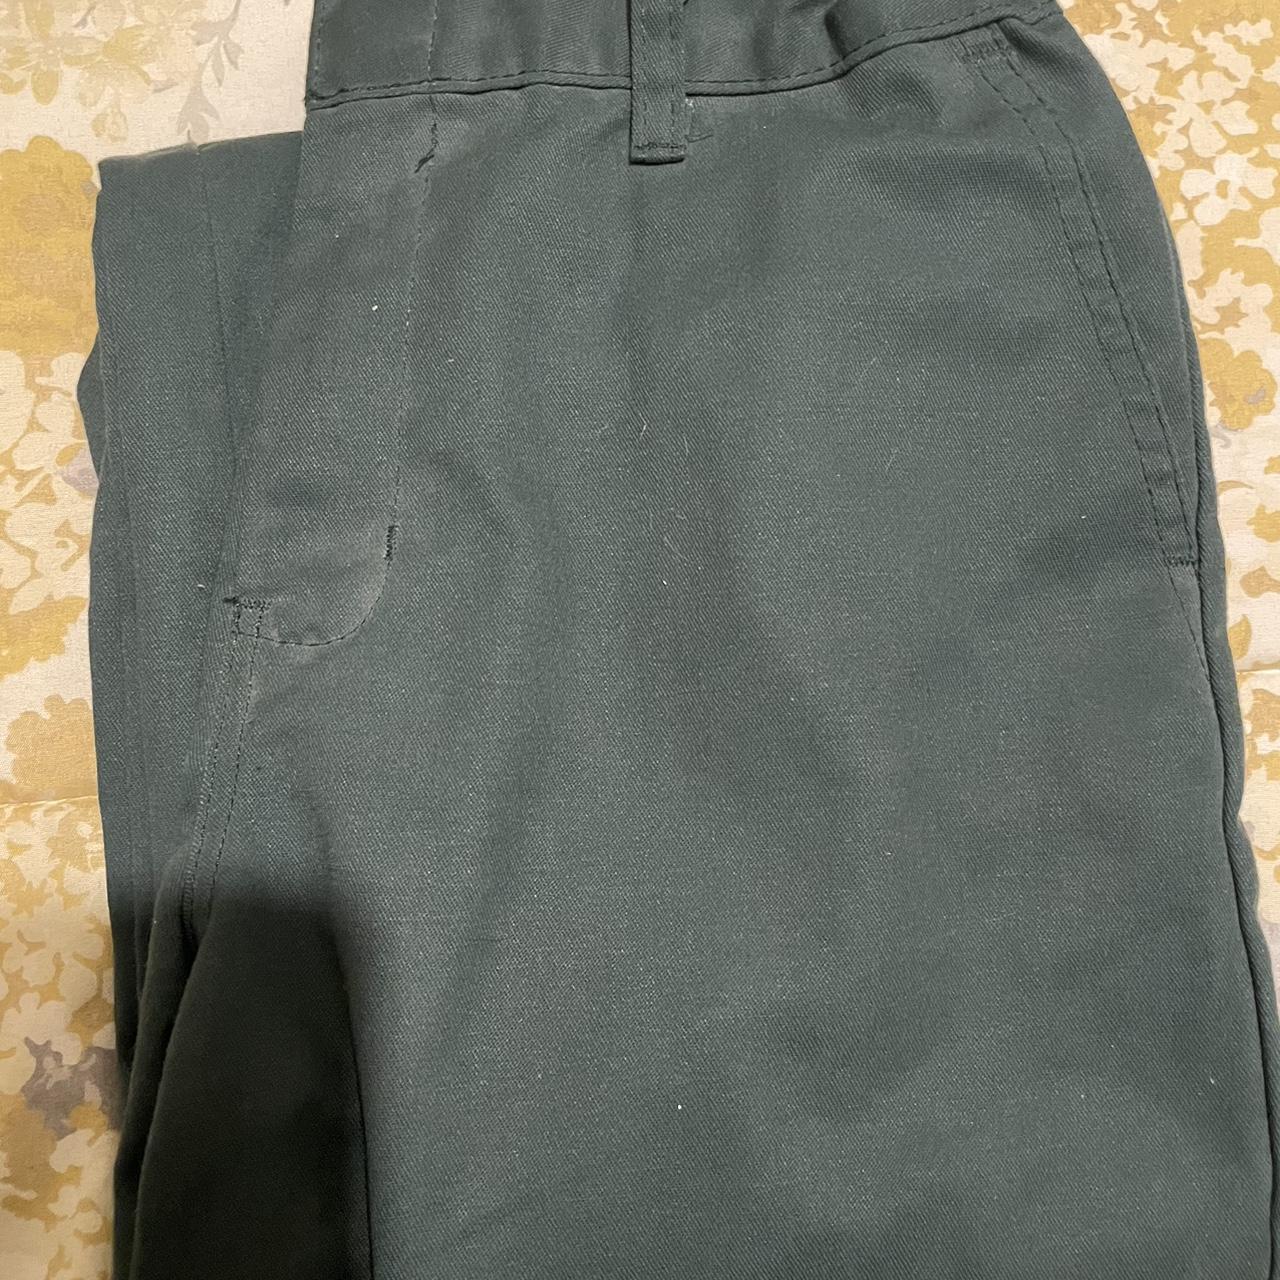 item listed by cheapsellz